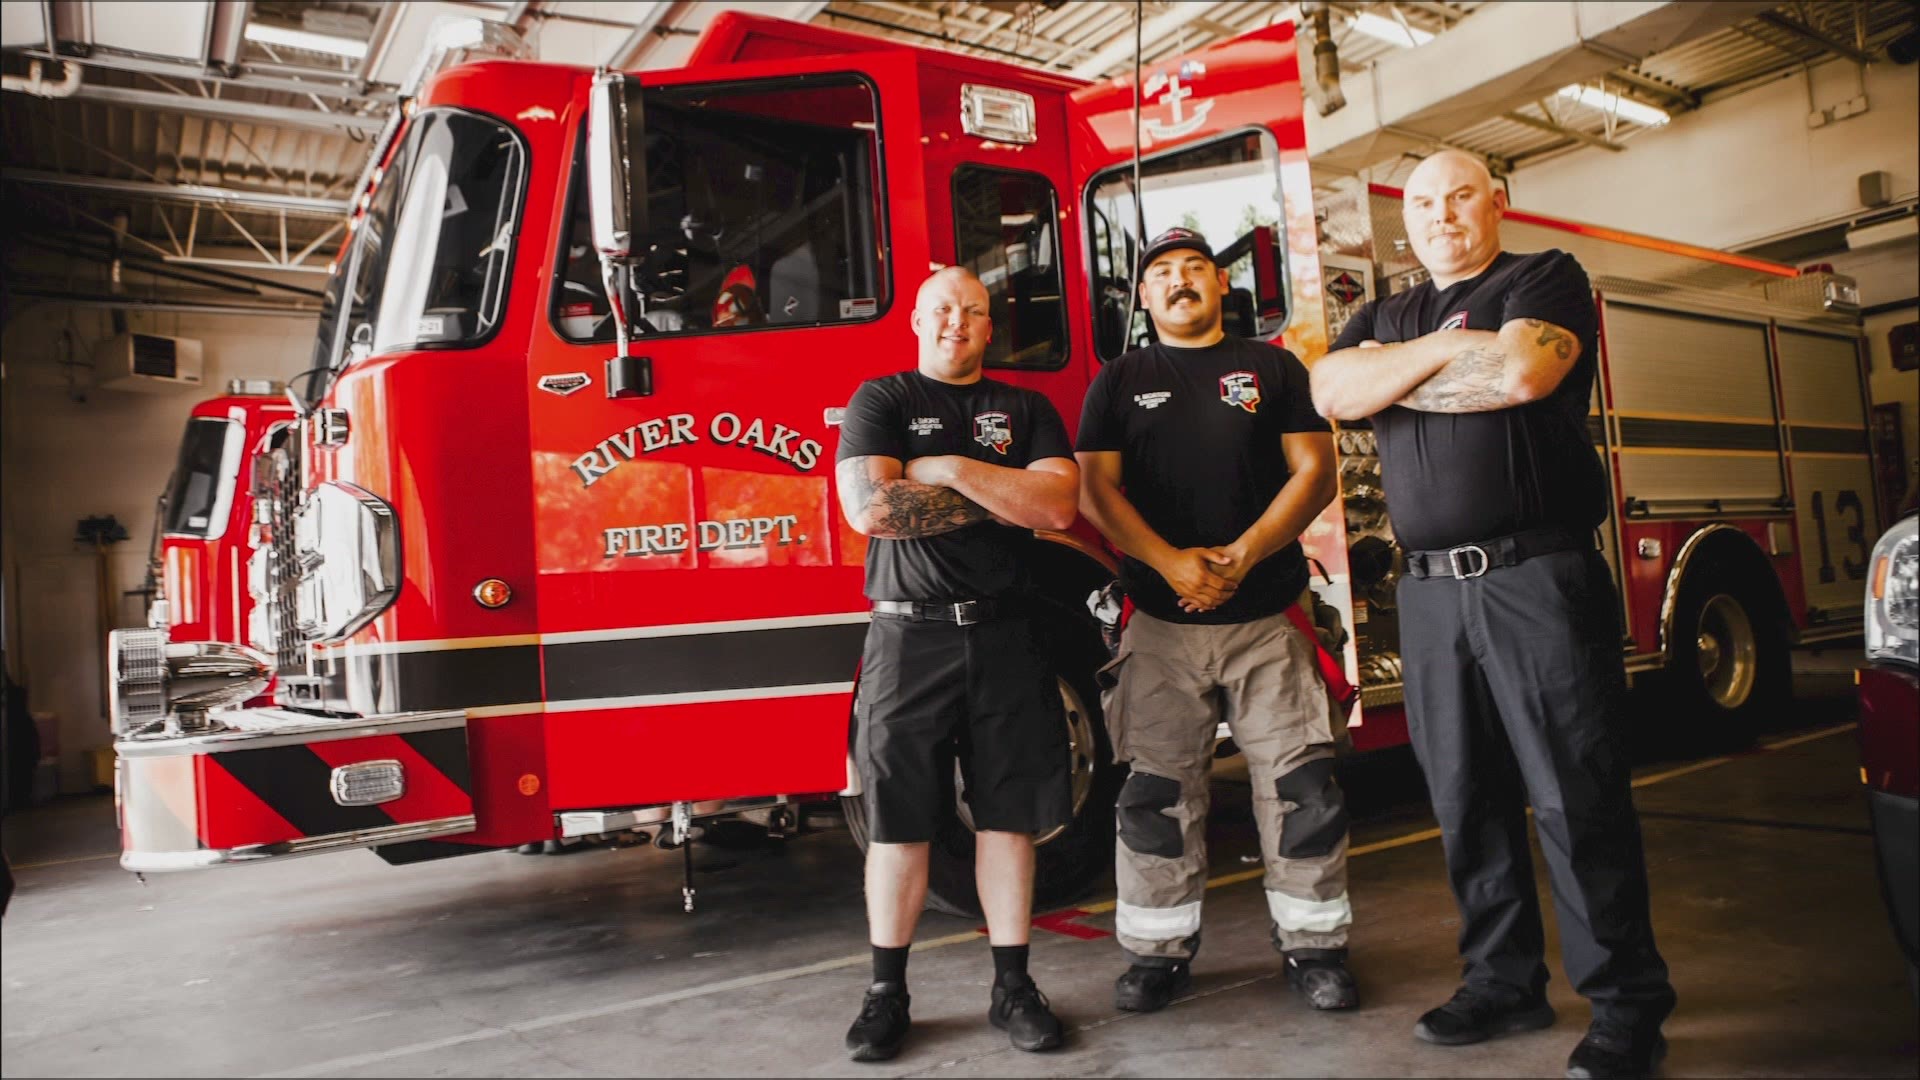 The River Oaks Fire Department plays an important role in our local community. Get to know them.